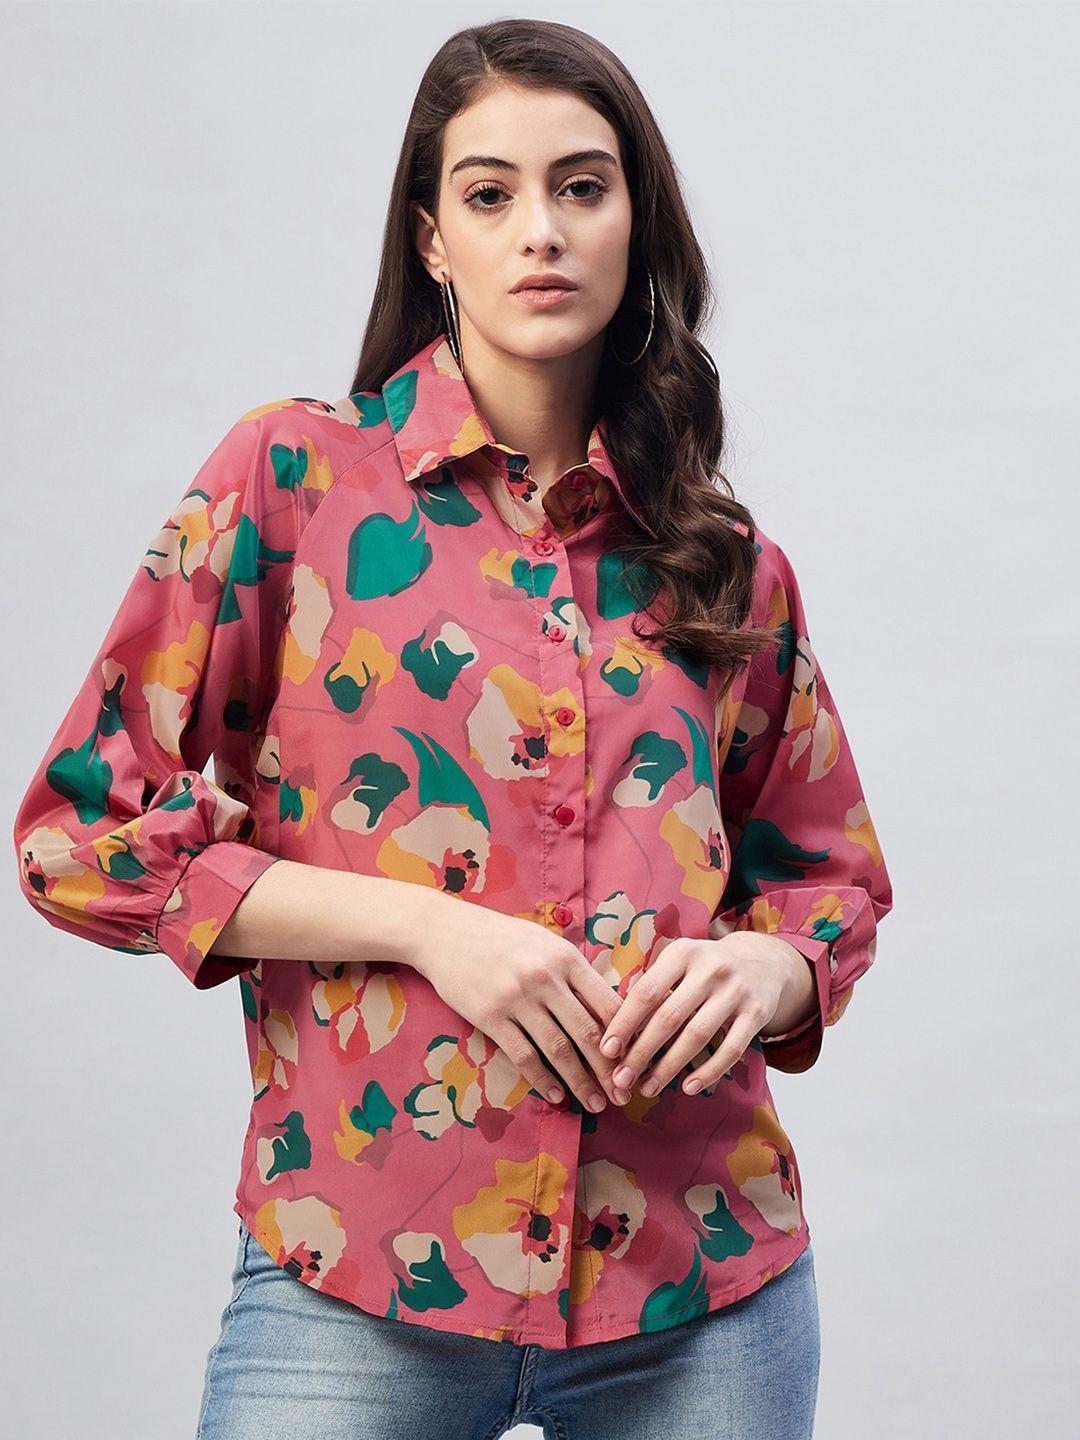 marie claire women printed casual shirt